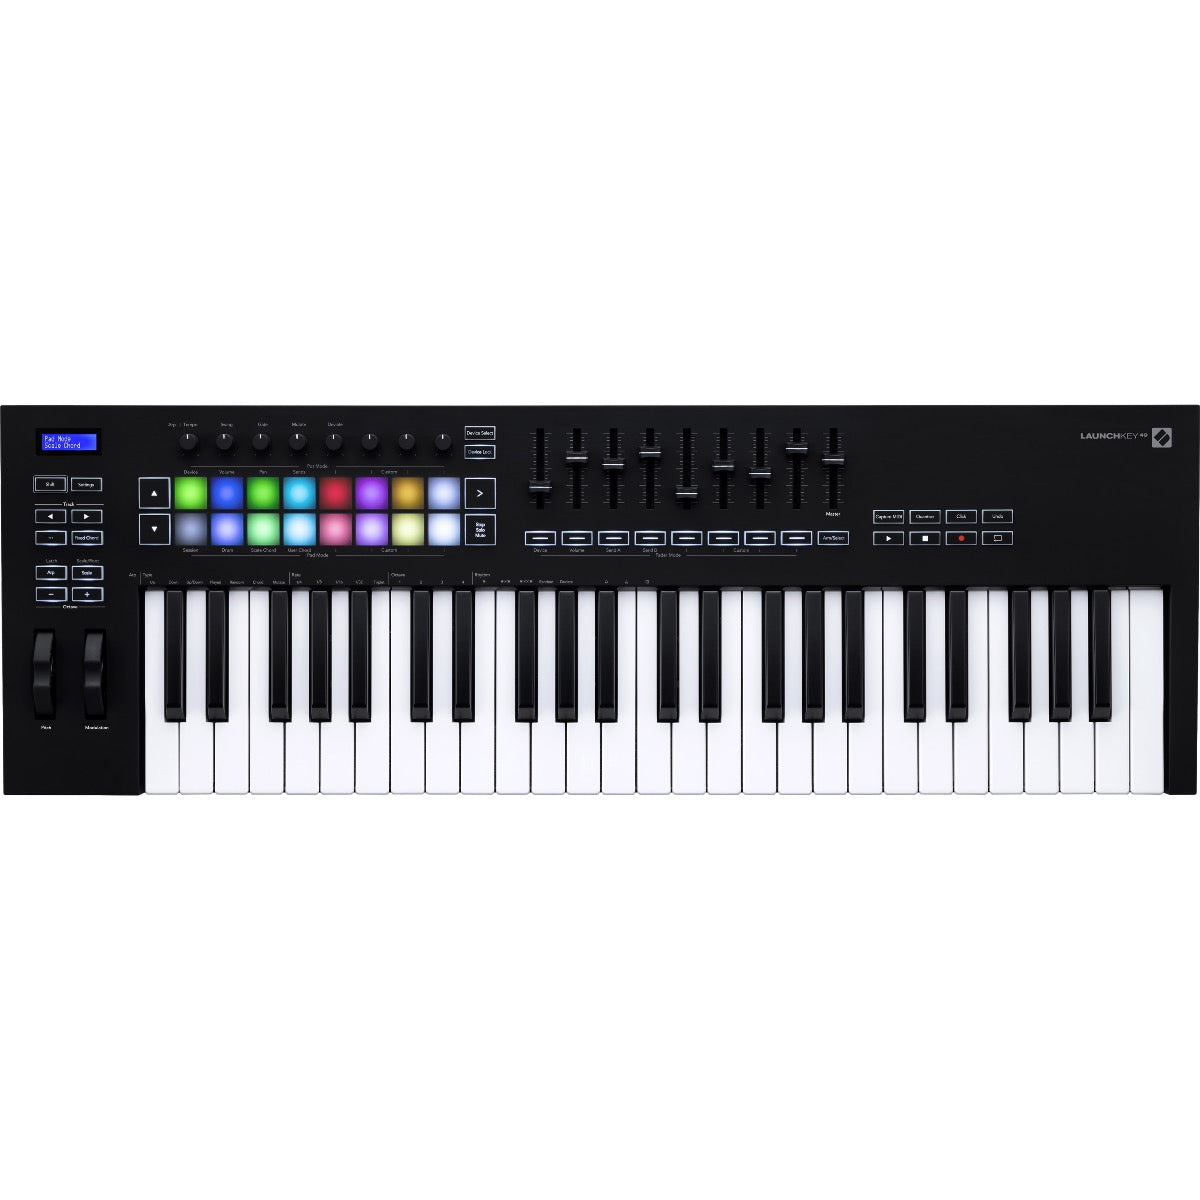 Top view of Novation Launchkey 49 MK3 Keyboard Controller